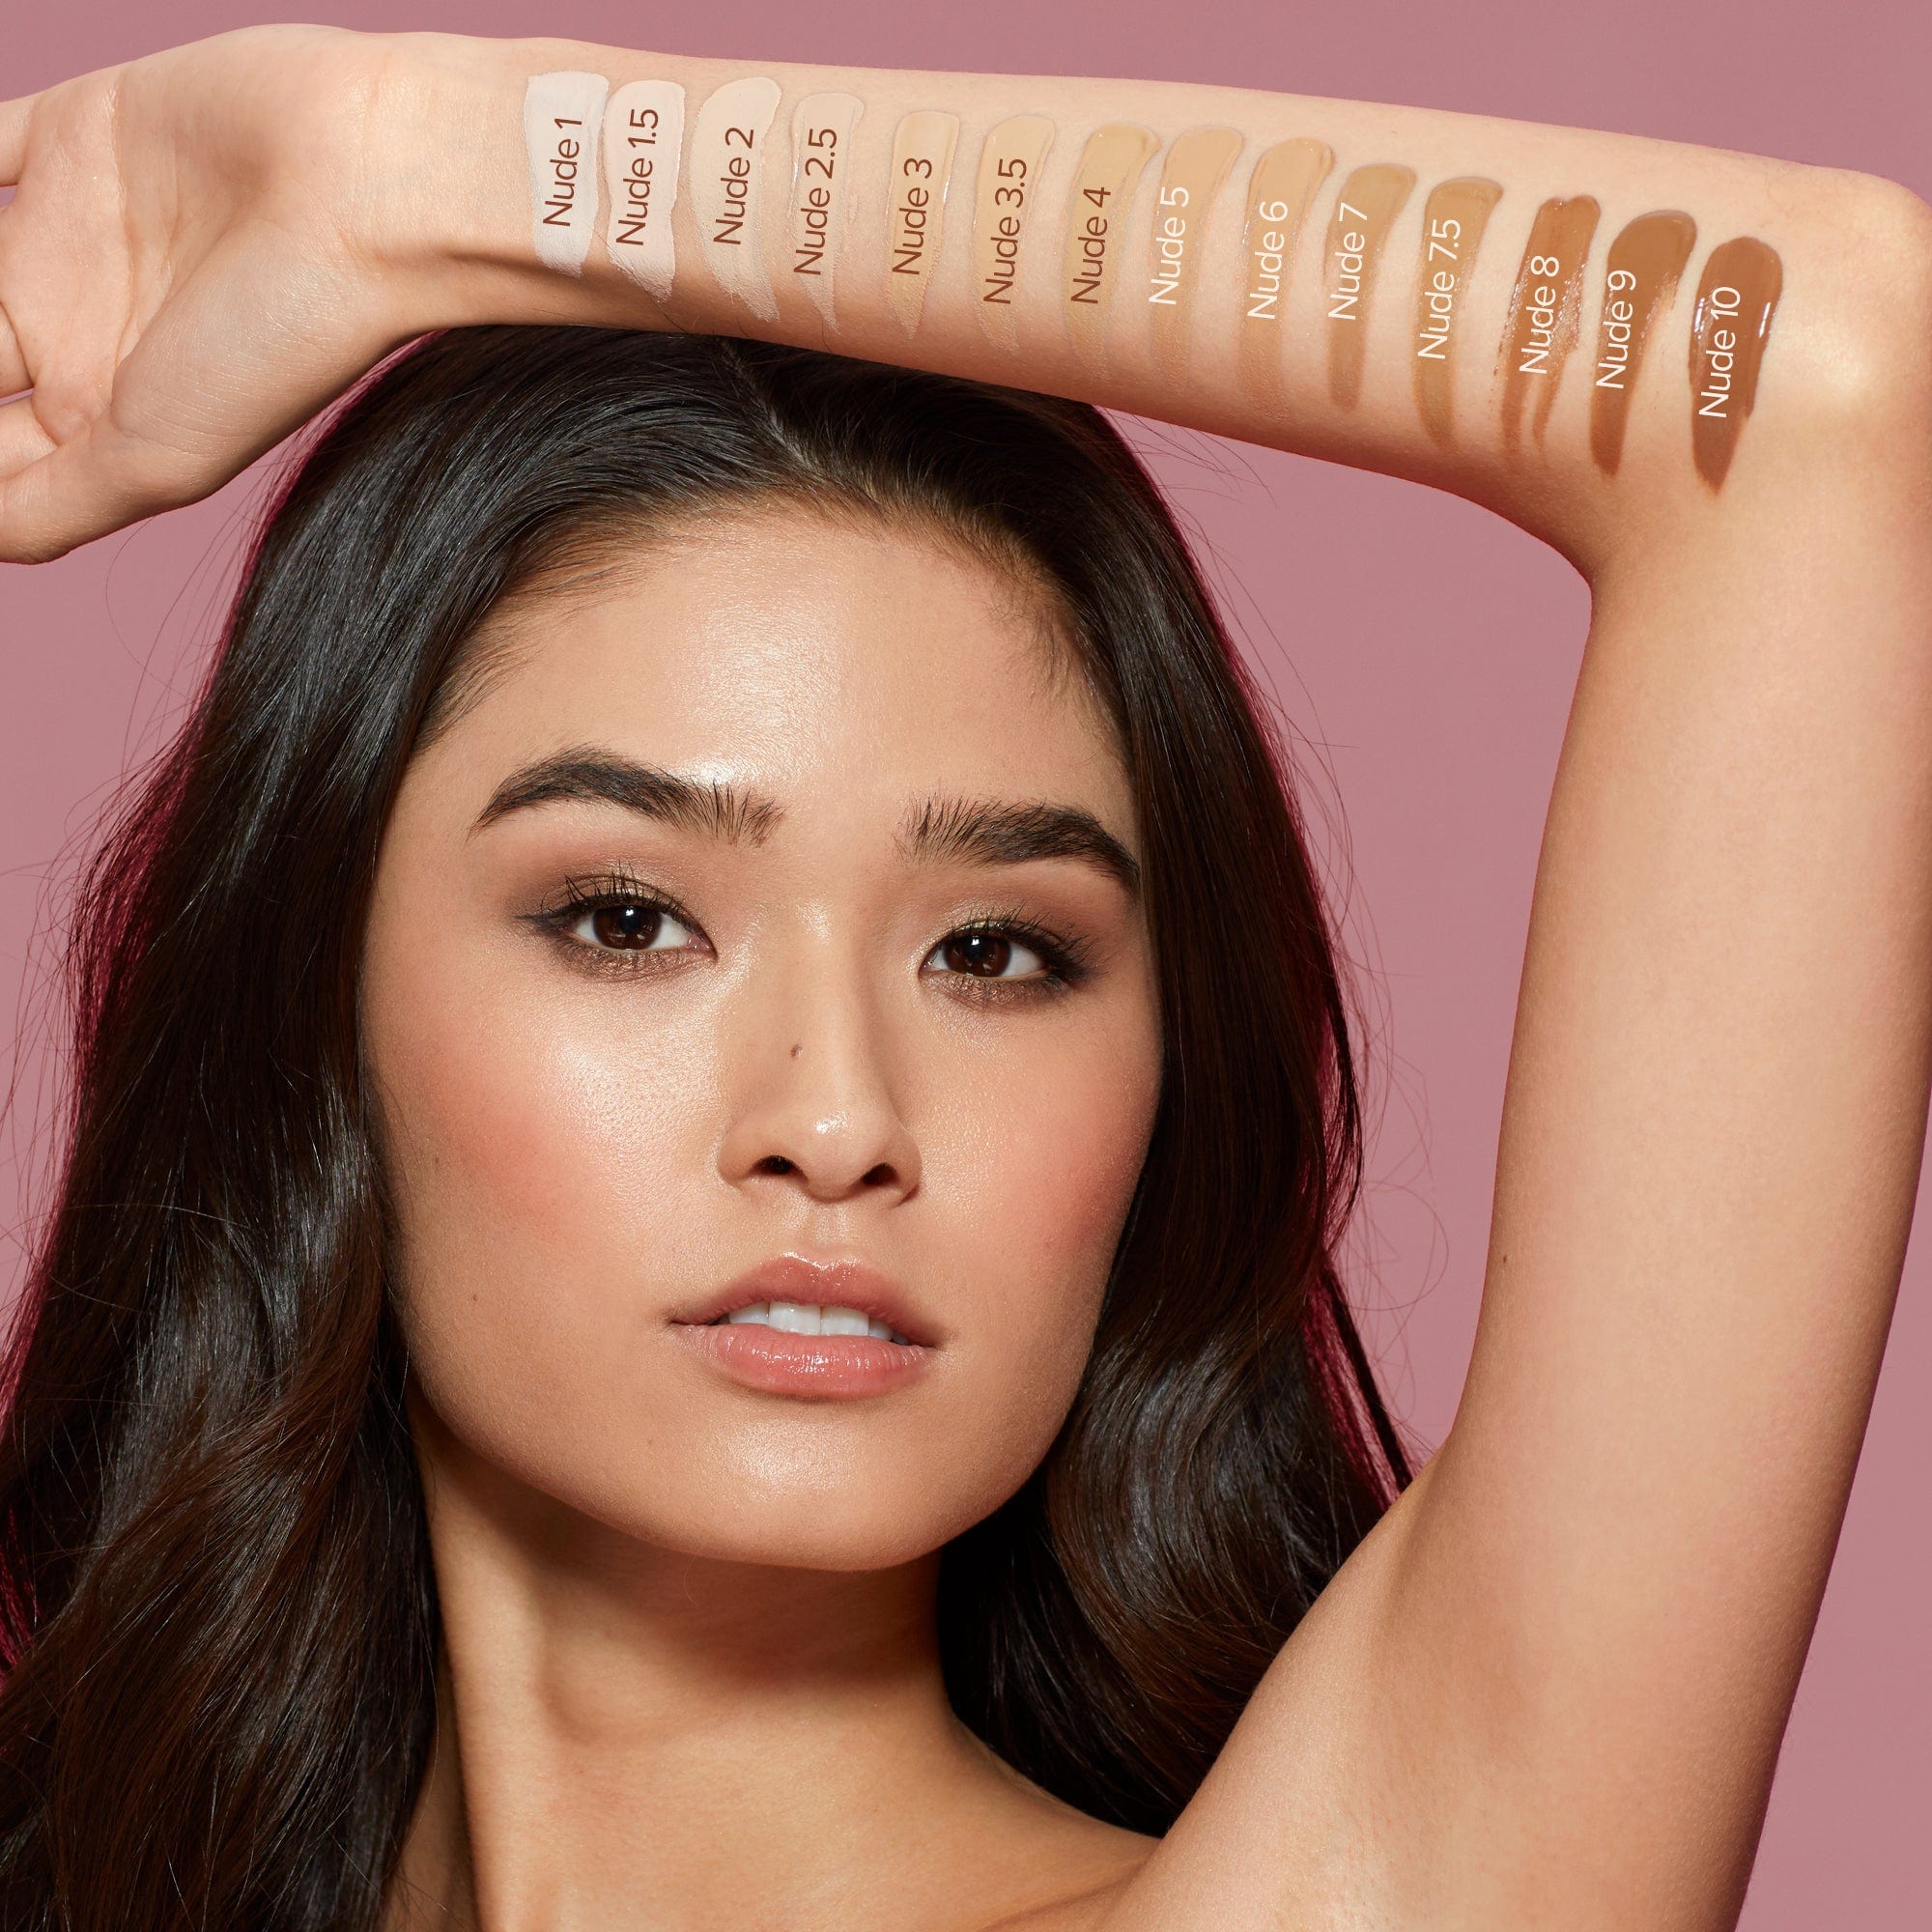 Mixed race young woman with shade Nude 2.5 swatch in her arm